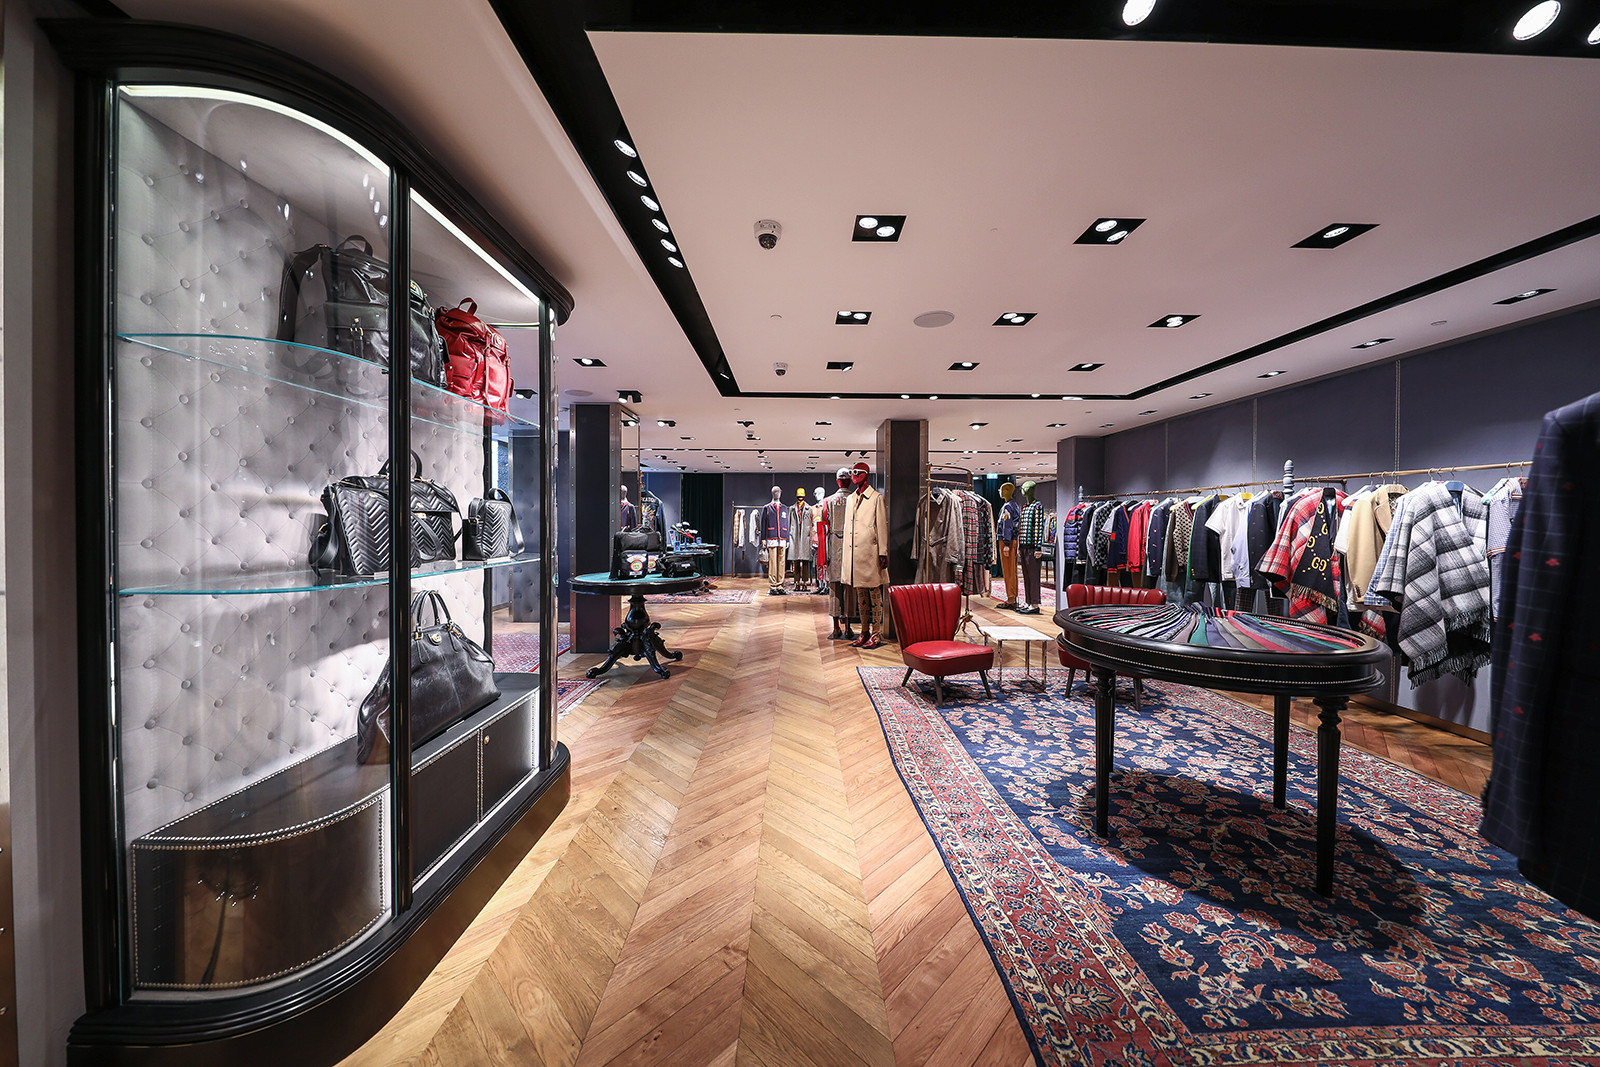 First look: Gucci reopens flagship London store